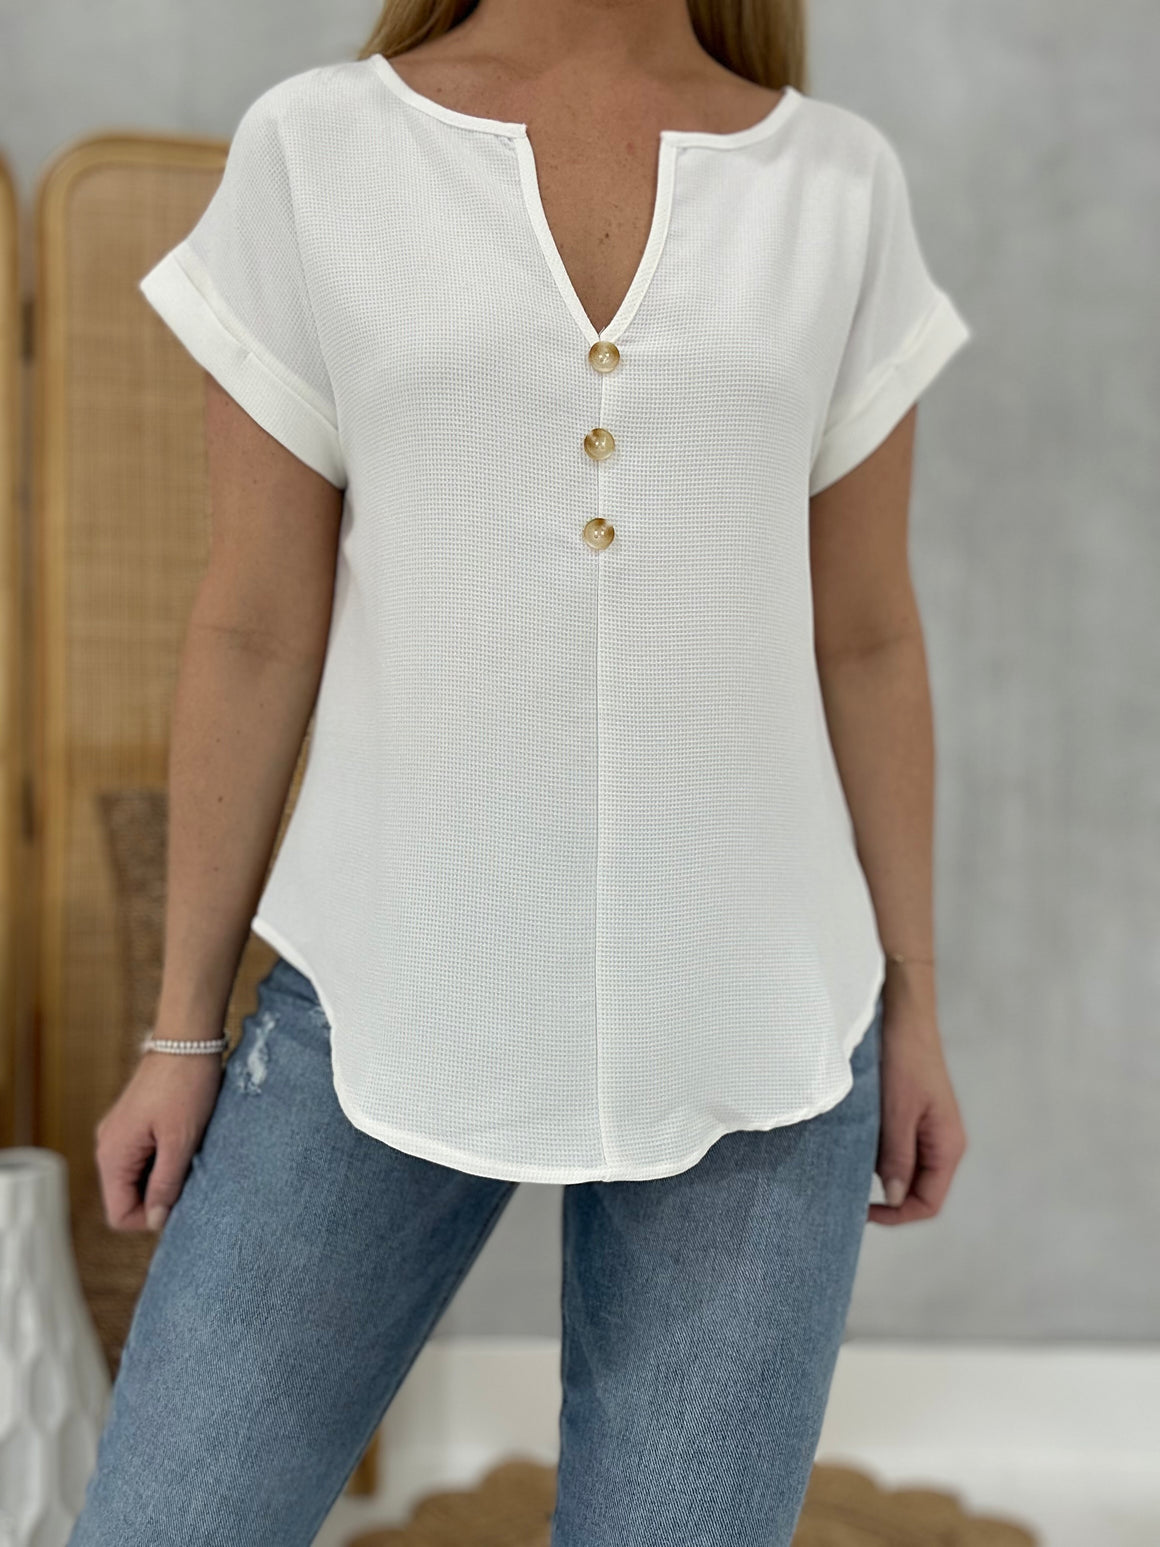 The Work House Blouse - White